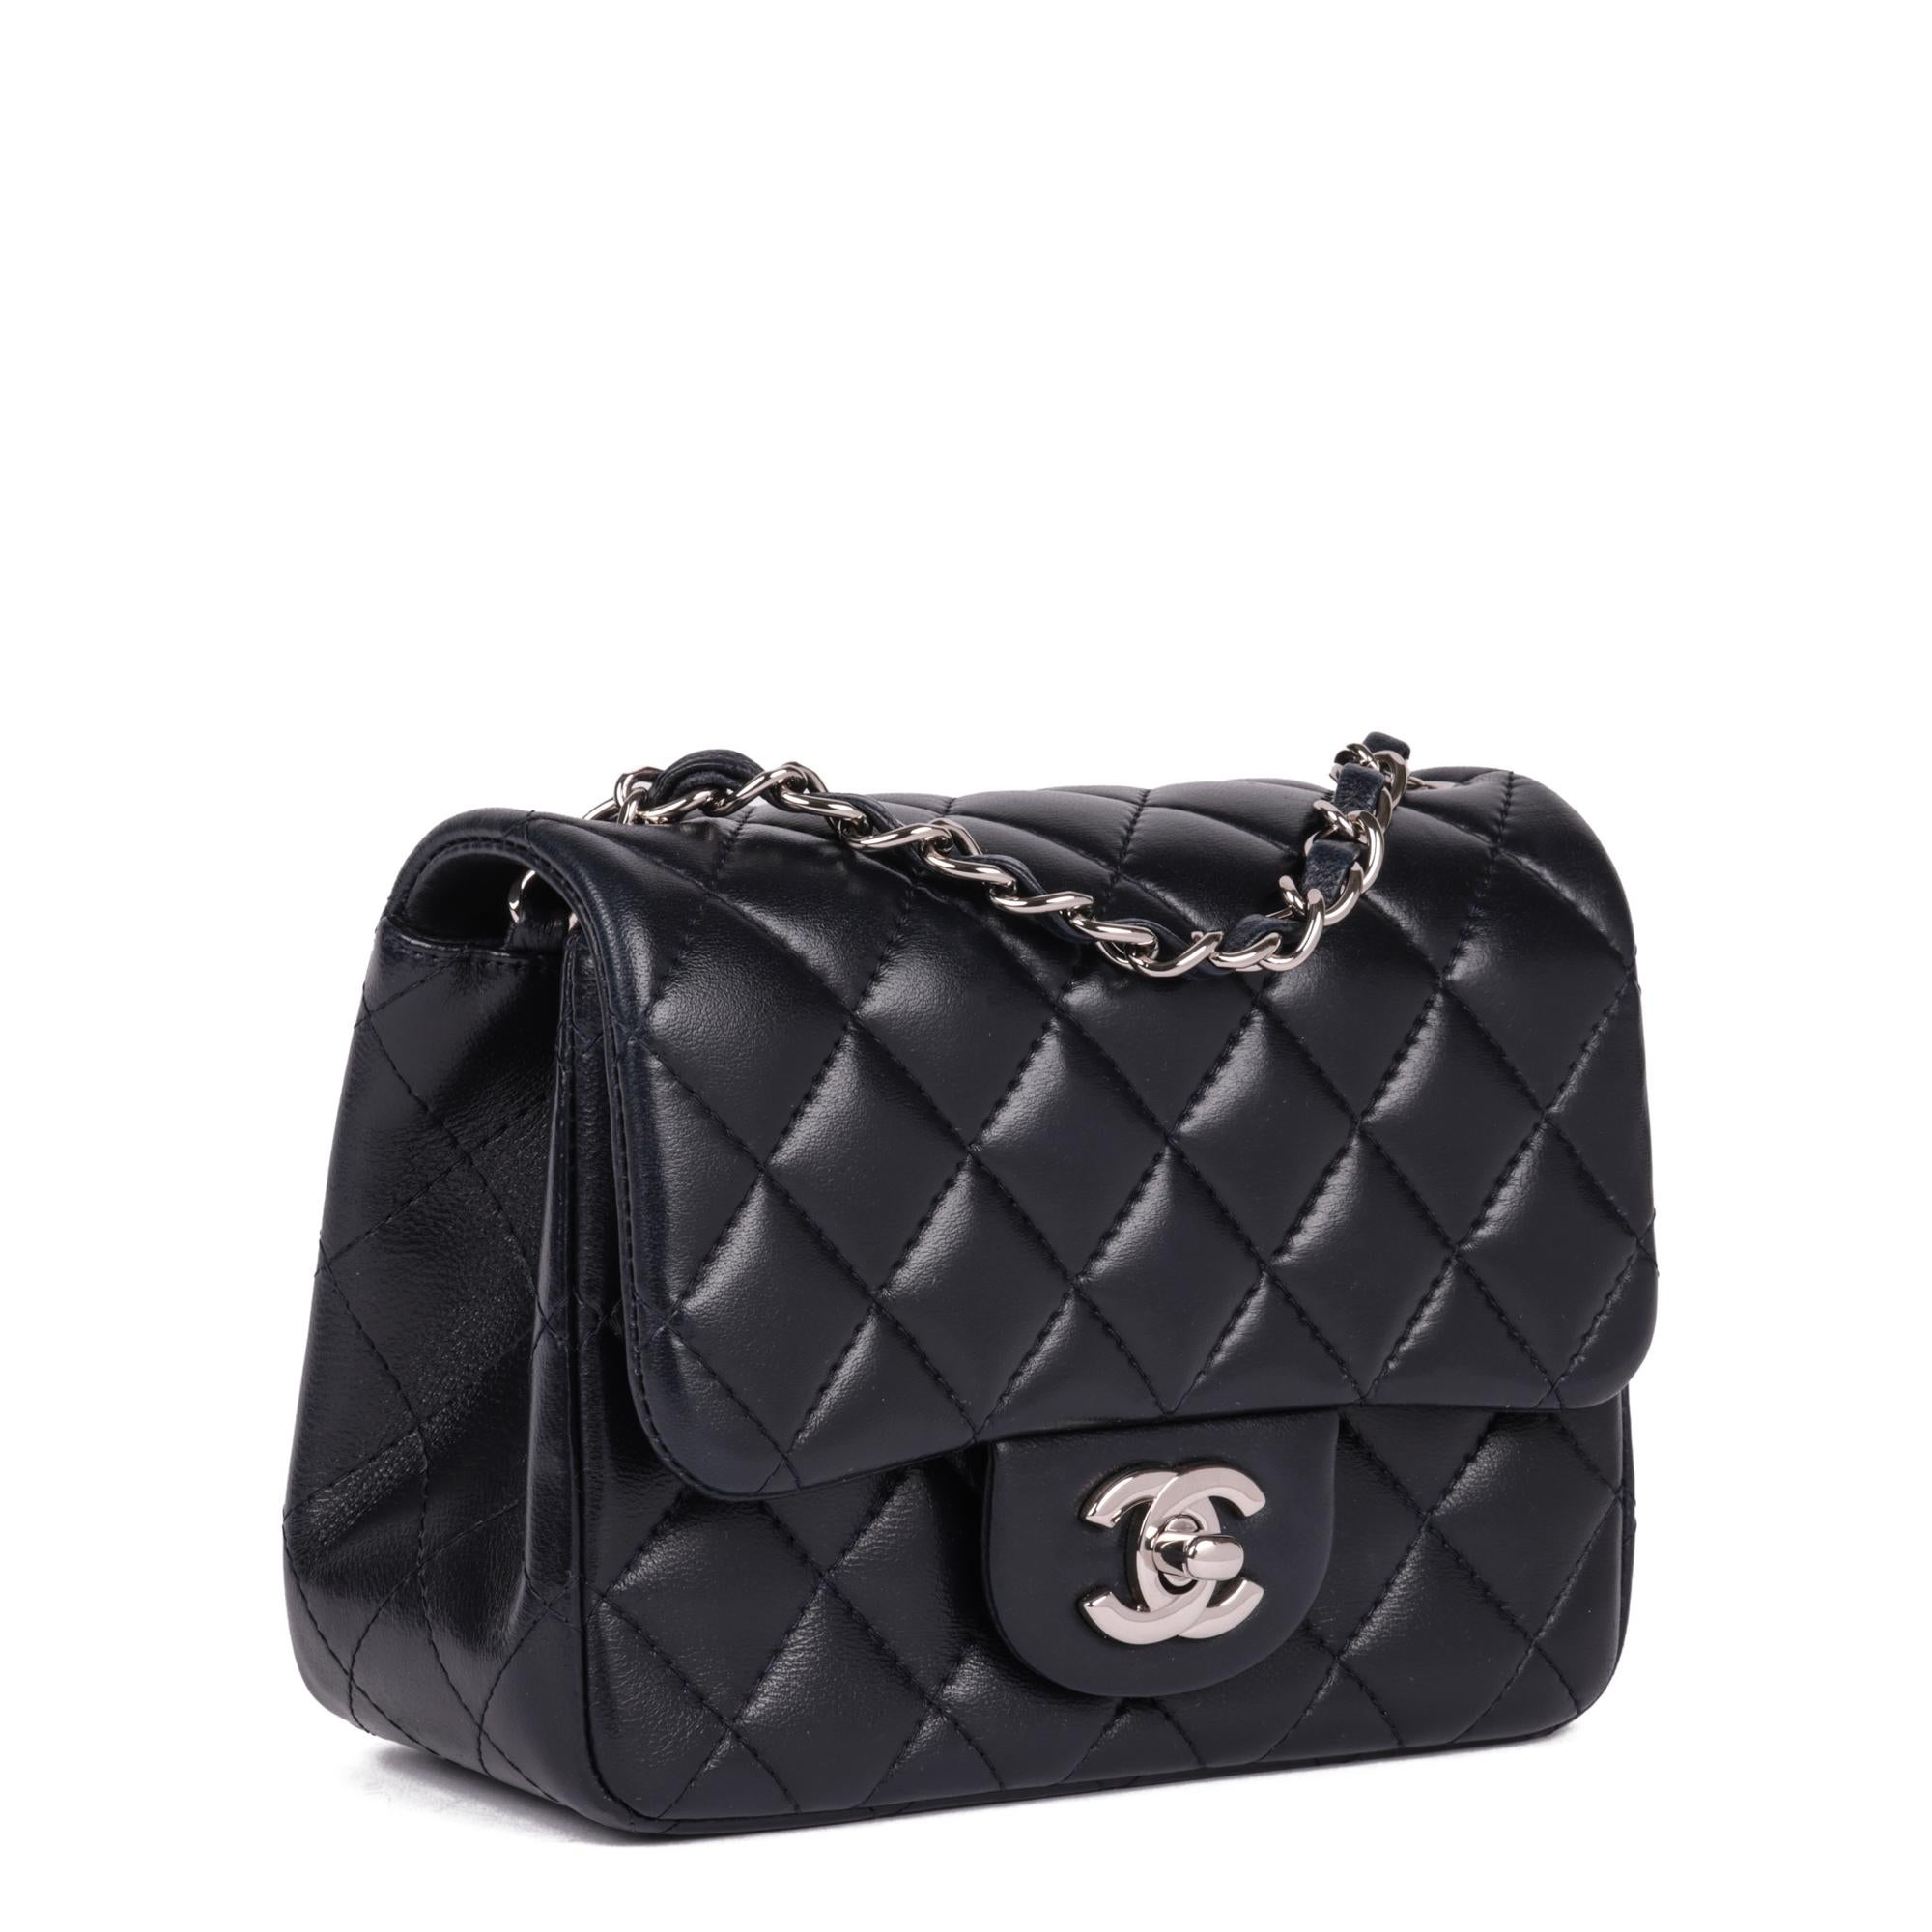 CHANEL
Navy Quilted Lambskin Square Mini Flap Bag

Xupes Reference: HB5026
Serial Number: 16873992
Age (Circa): 2012
Accompanied By: Chanel Dust Bag, Authenticity Card, Care Booklet
Authenticity Details: Authenticity Card, Serial Sticker (Made in